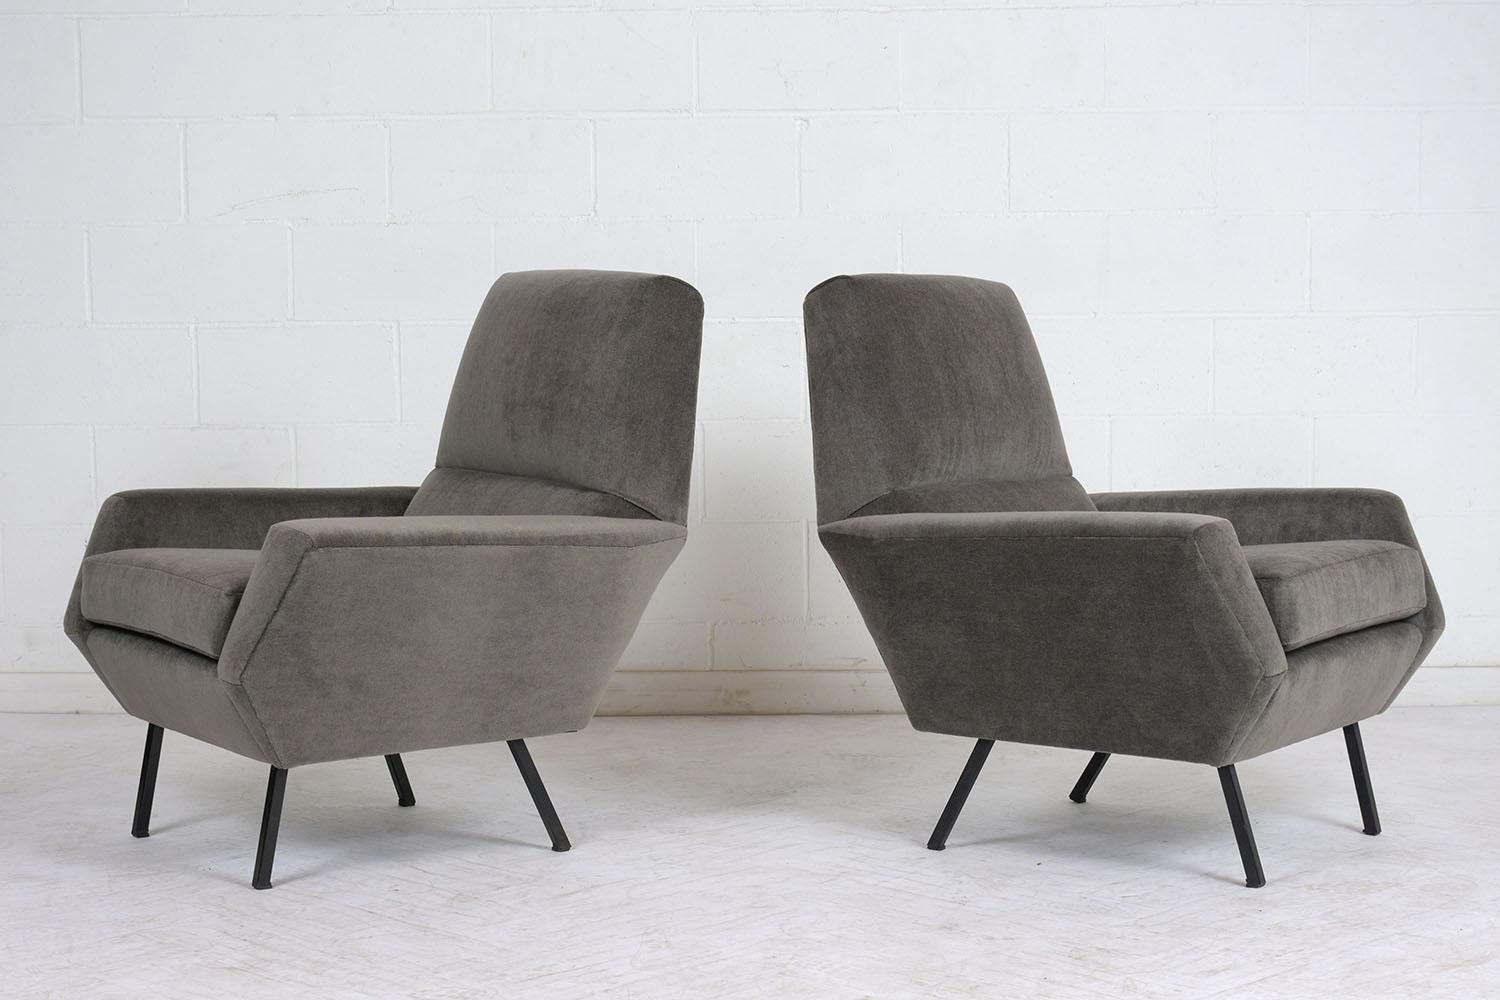 This pair of 1960s Italian Mid-Century Modern style bergères have been completely restored. The single cushion chairs have new foam cushions throughout and have been professionally upholstered in a dark gray color Mohair fabric. The bergères feature